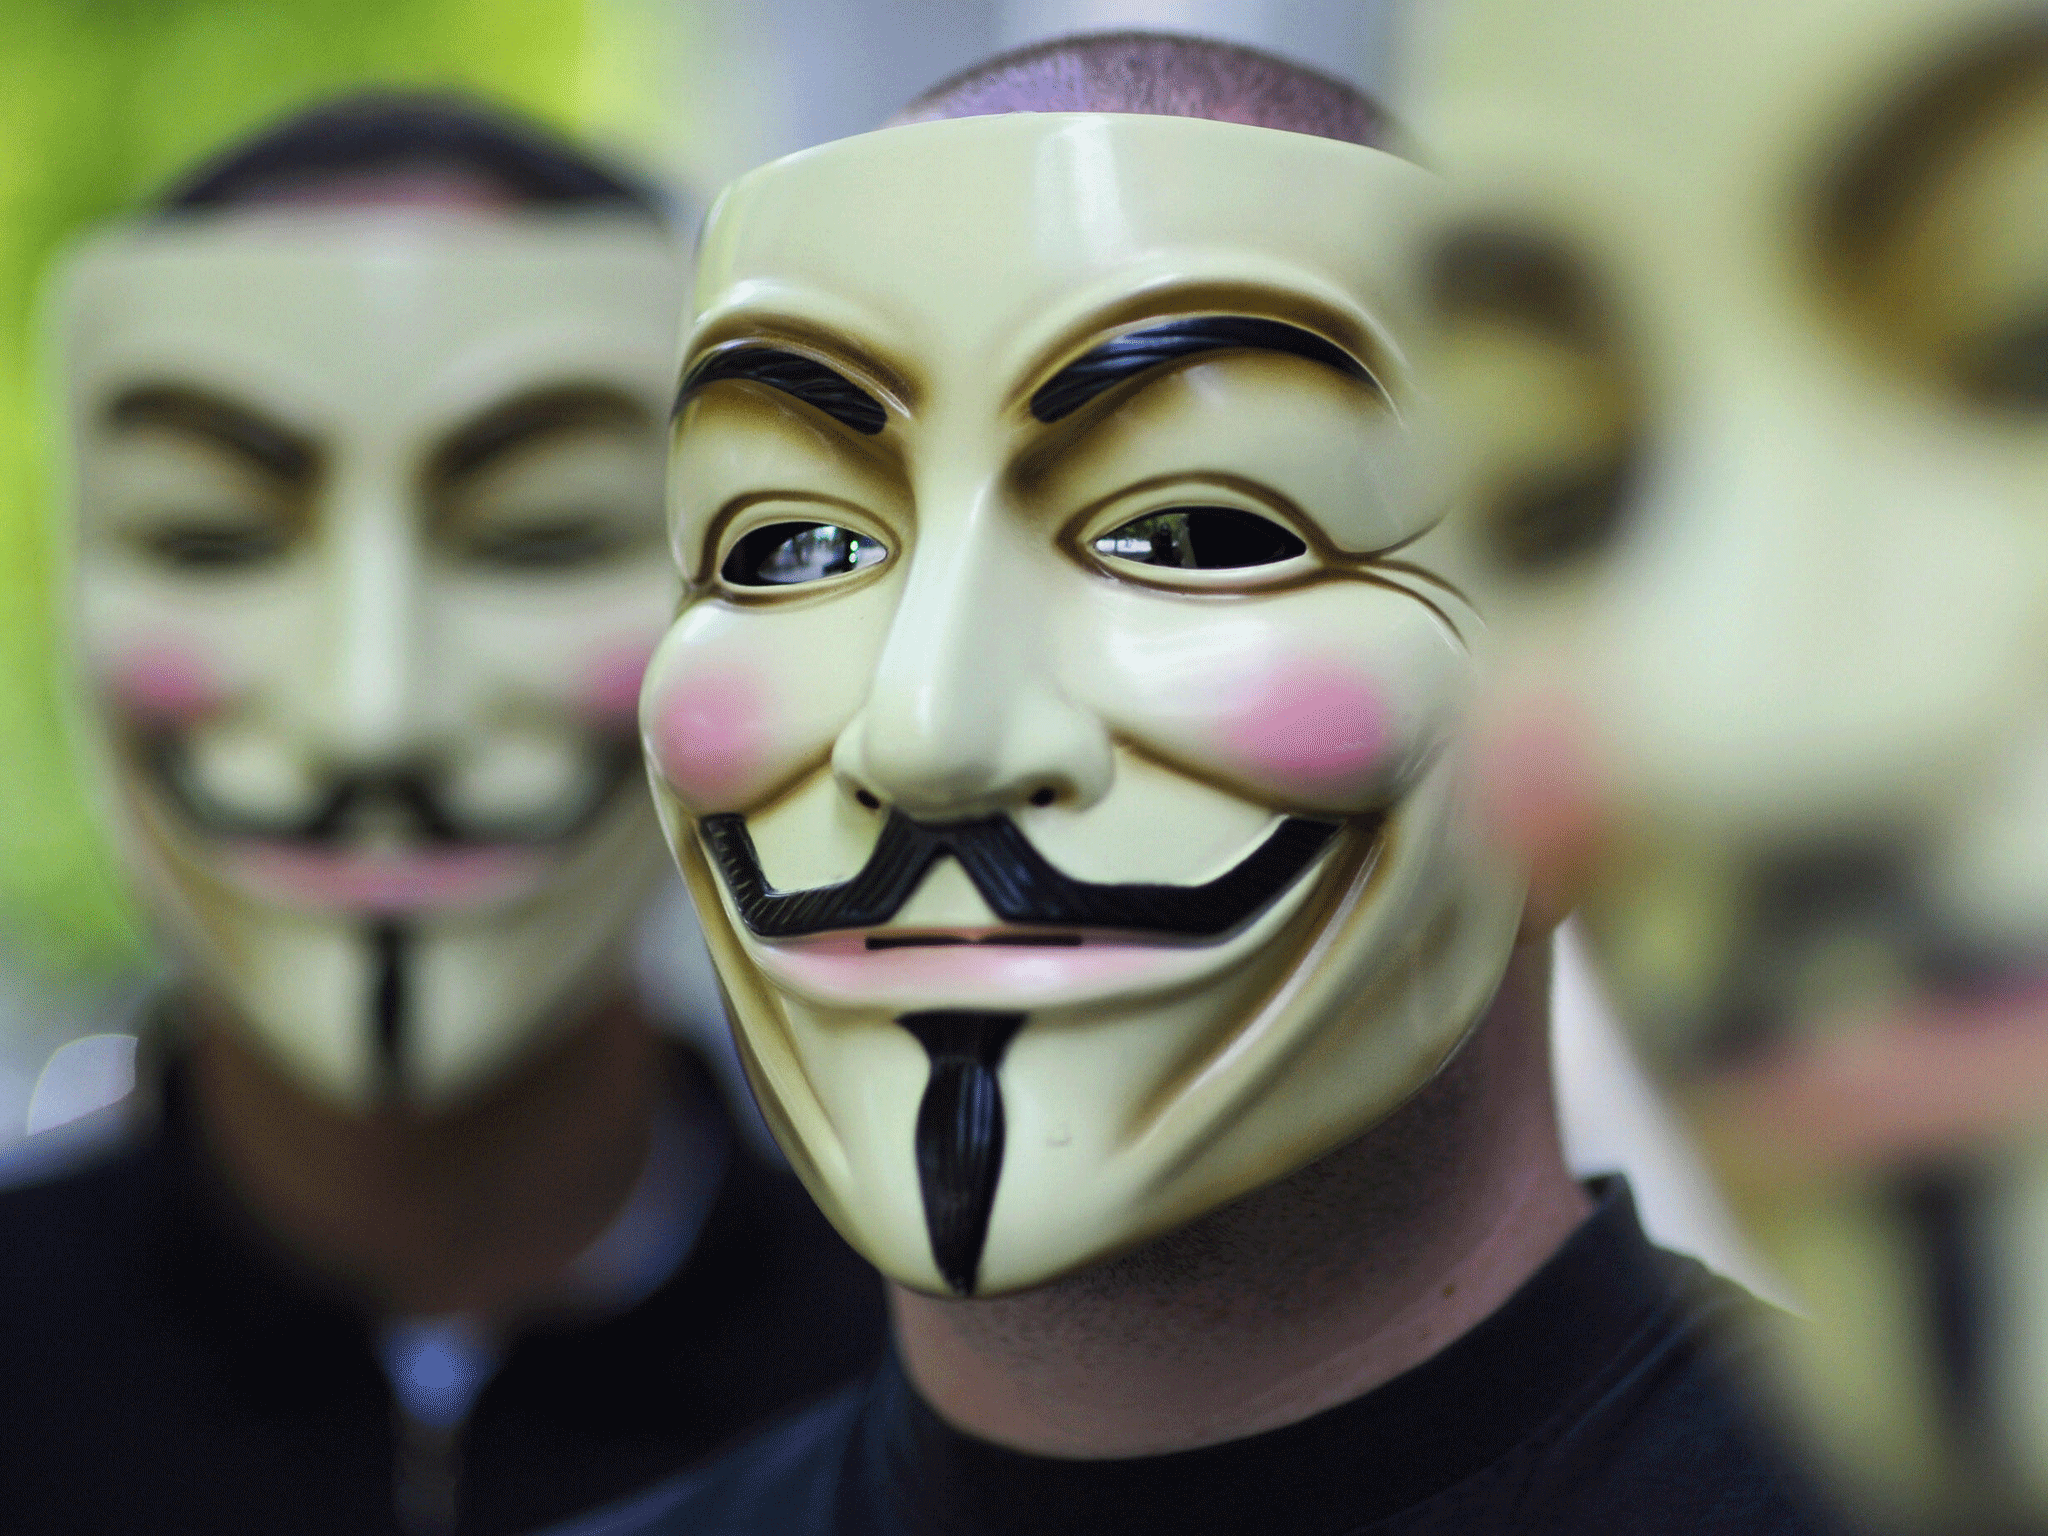 A hit list has been drawn up of corporations Anonymous intend to attack